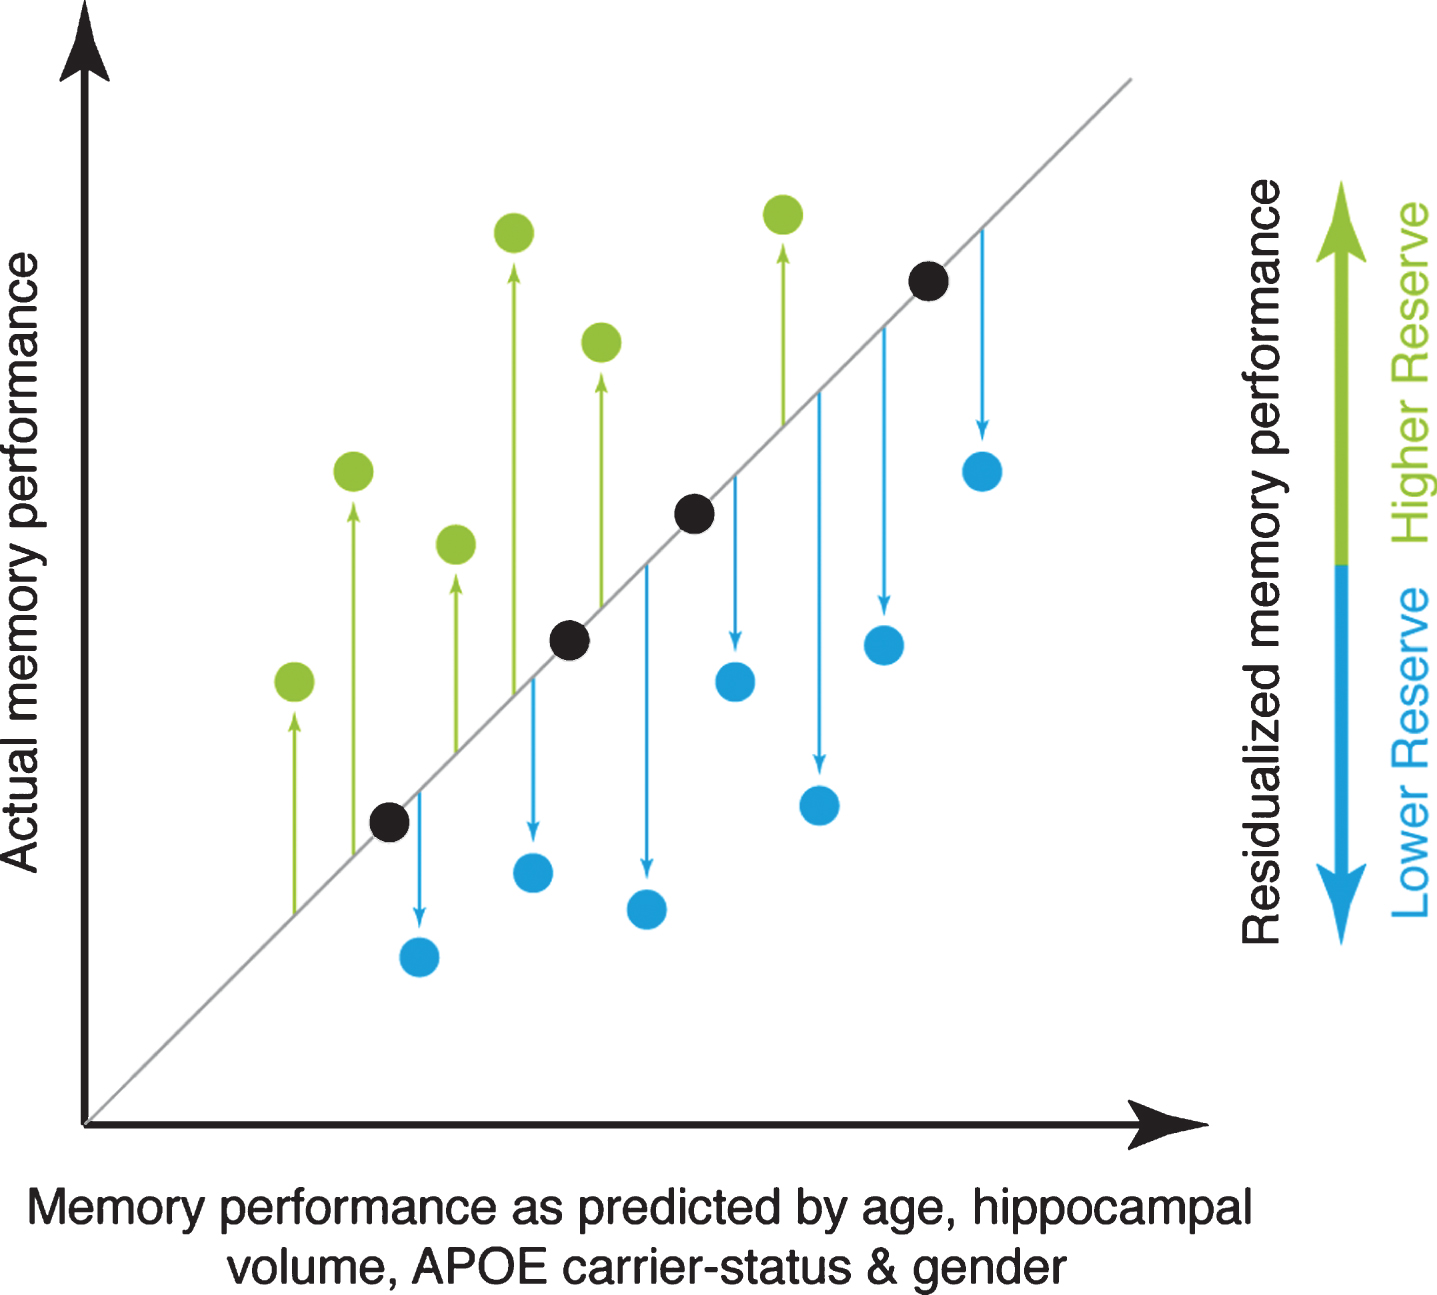 Illustration of the principle underlying the reserve measure used for the current study. The actual level of memory performance is plotted against the memory performance as predicted by age, hippocampal volume, APOE carrier-status, and gender. Individuals whose actual memory performance level is higher than predicted (green circles) have high reserve, whereas individuals whose actual memory performance is lower than predicted (blue circles) have low reserve in the memory domain.